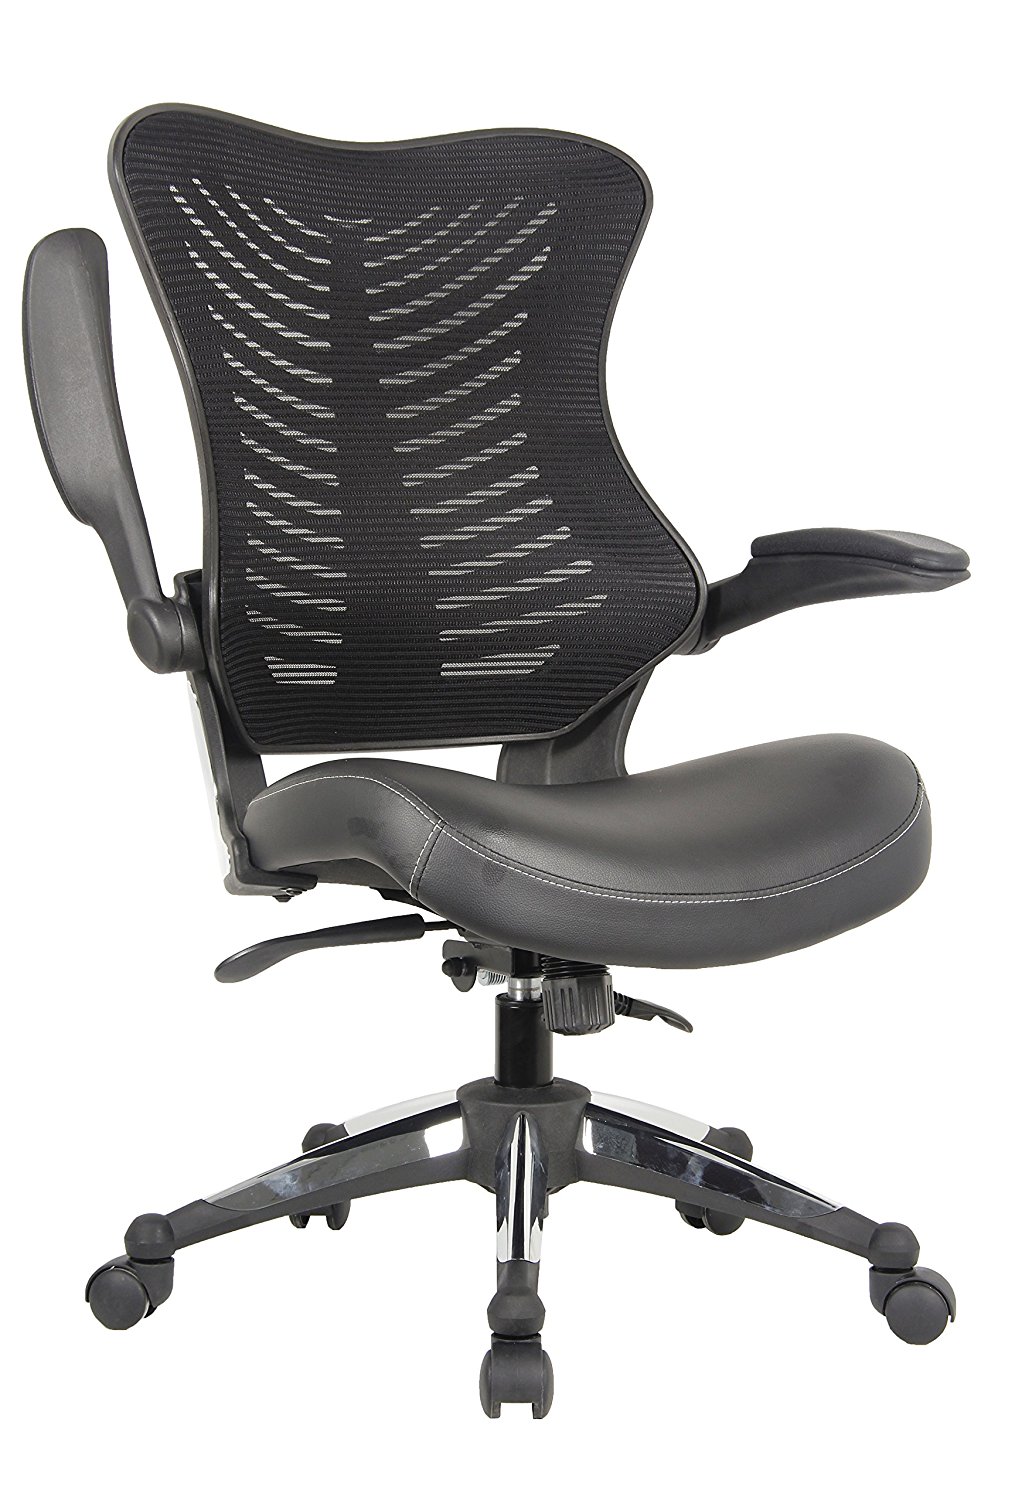 Office Factor Executive Mesh Office Chair